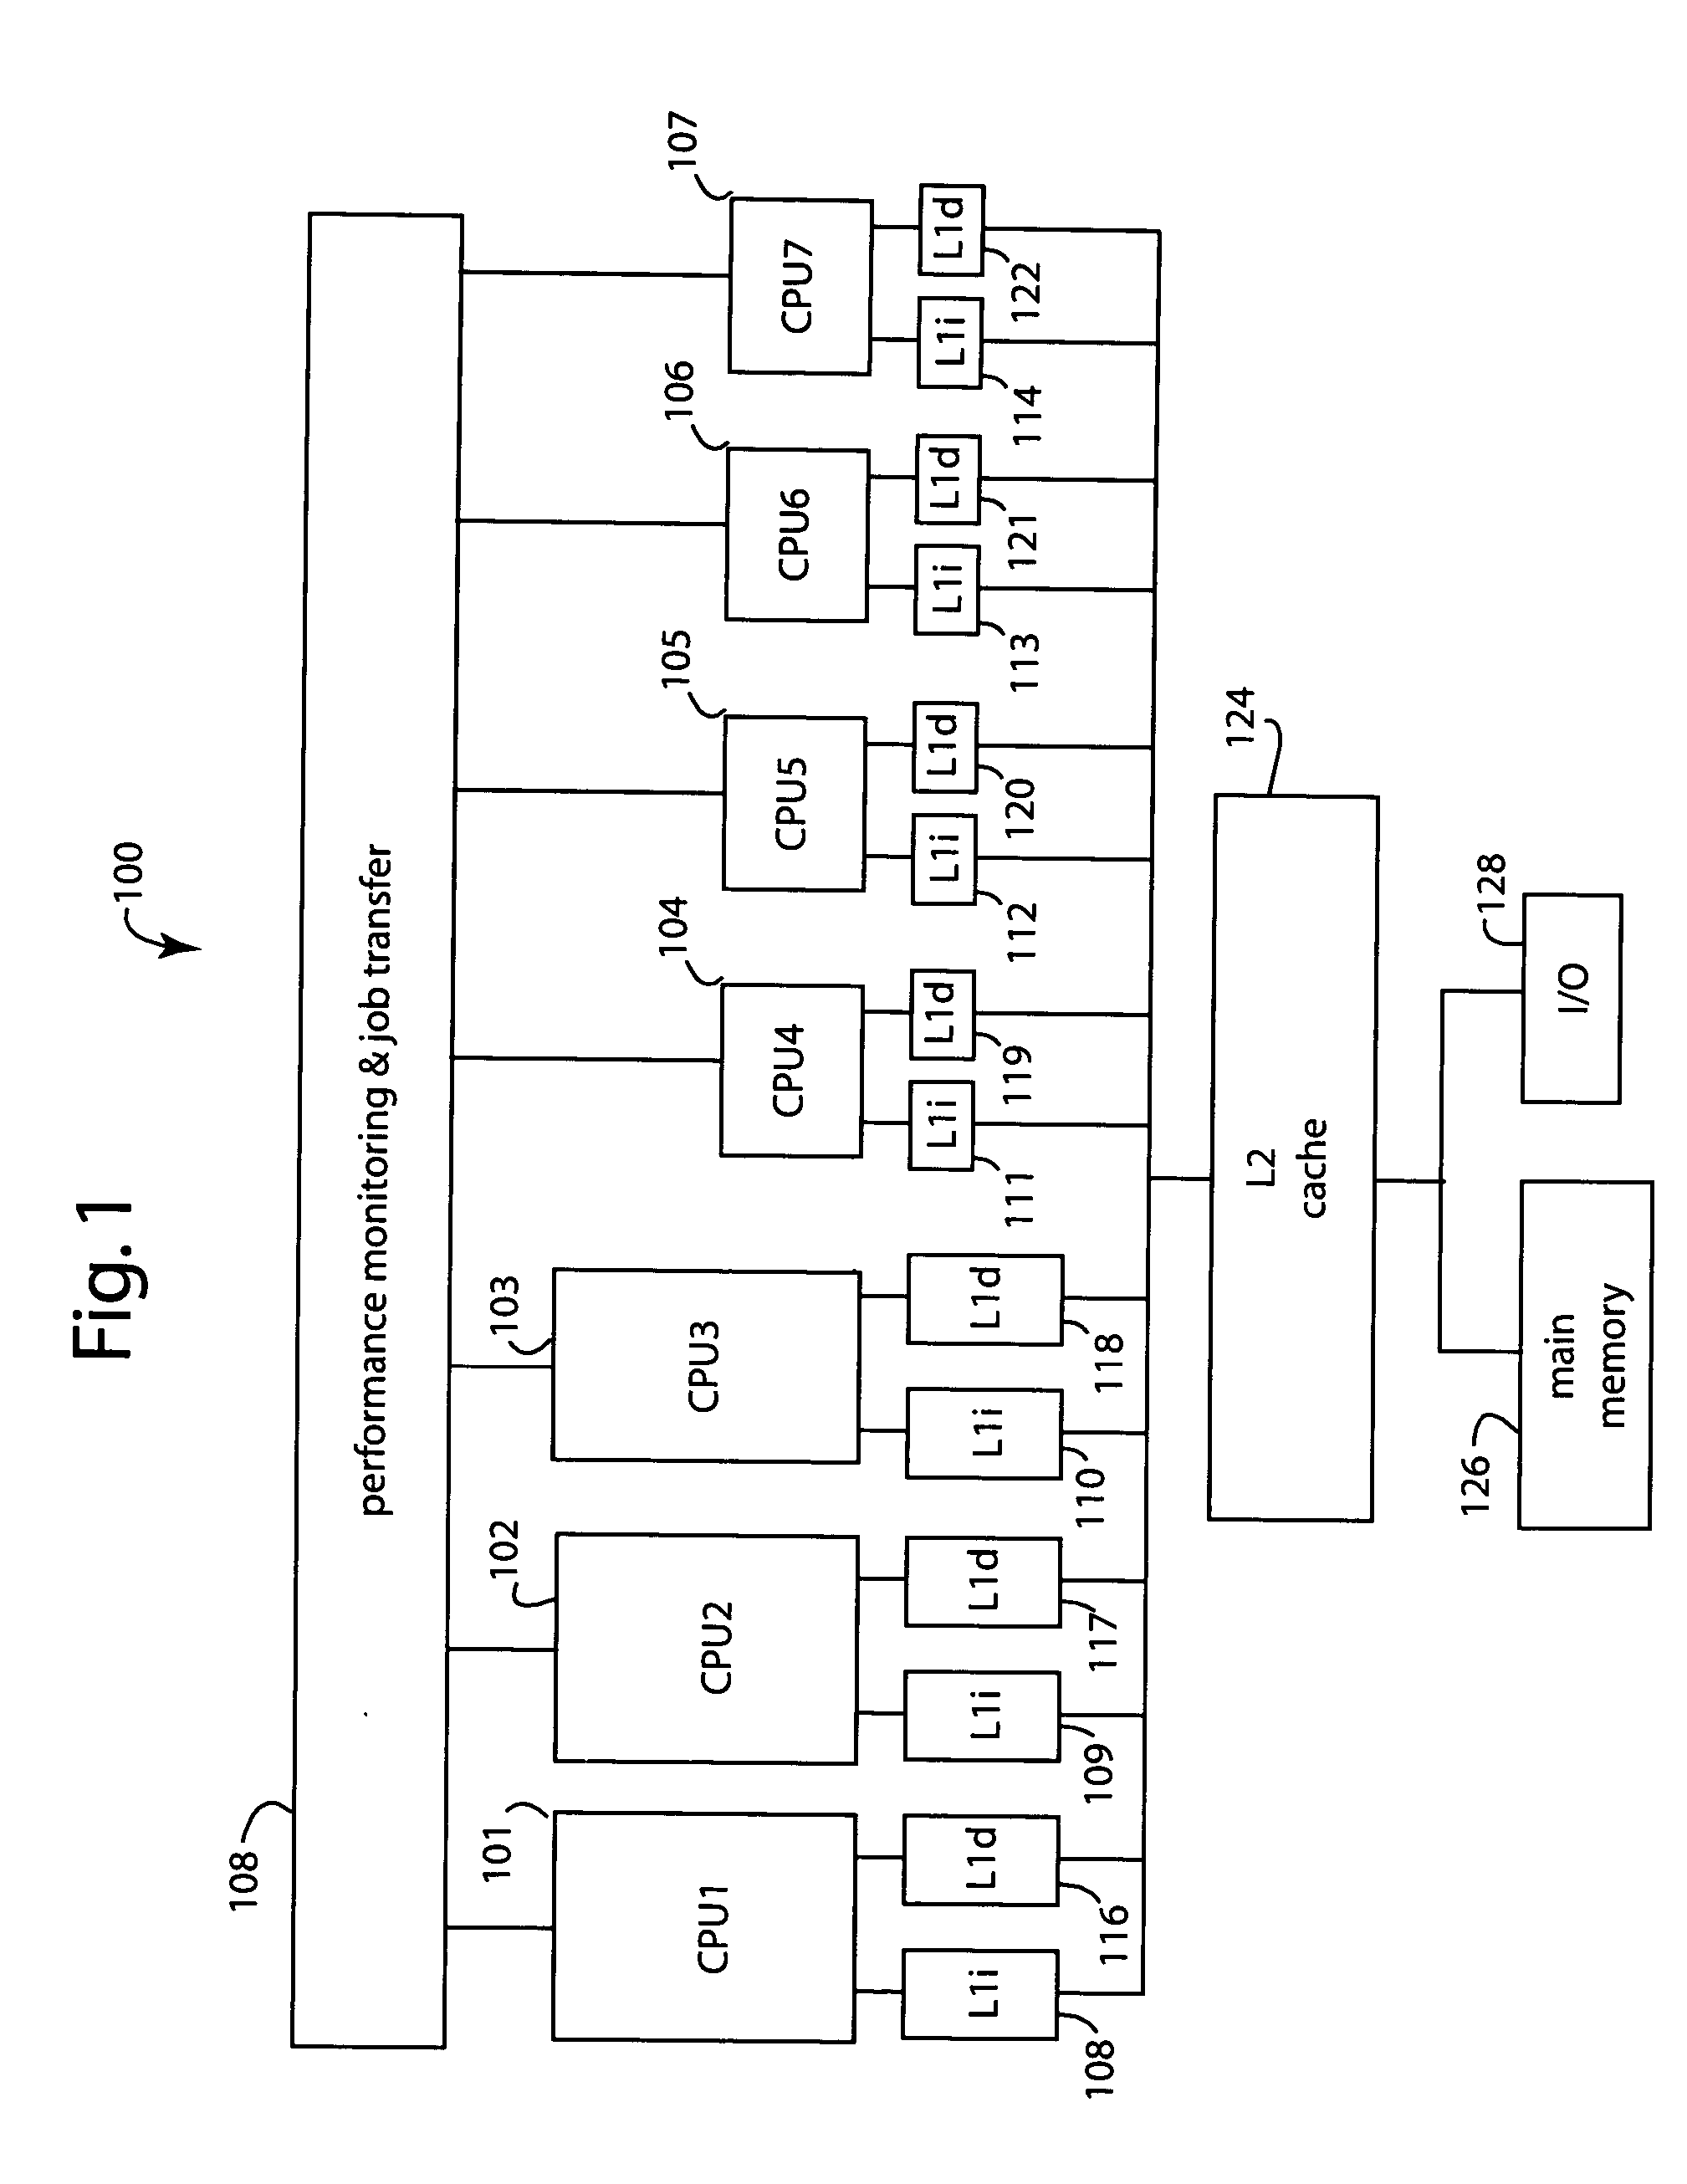 Heterogeneous processor core systems for improved throughput